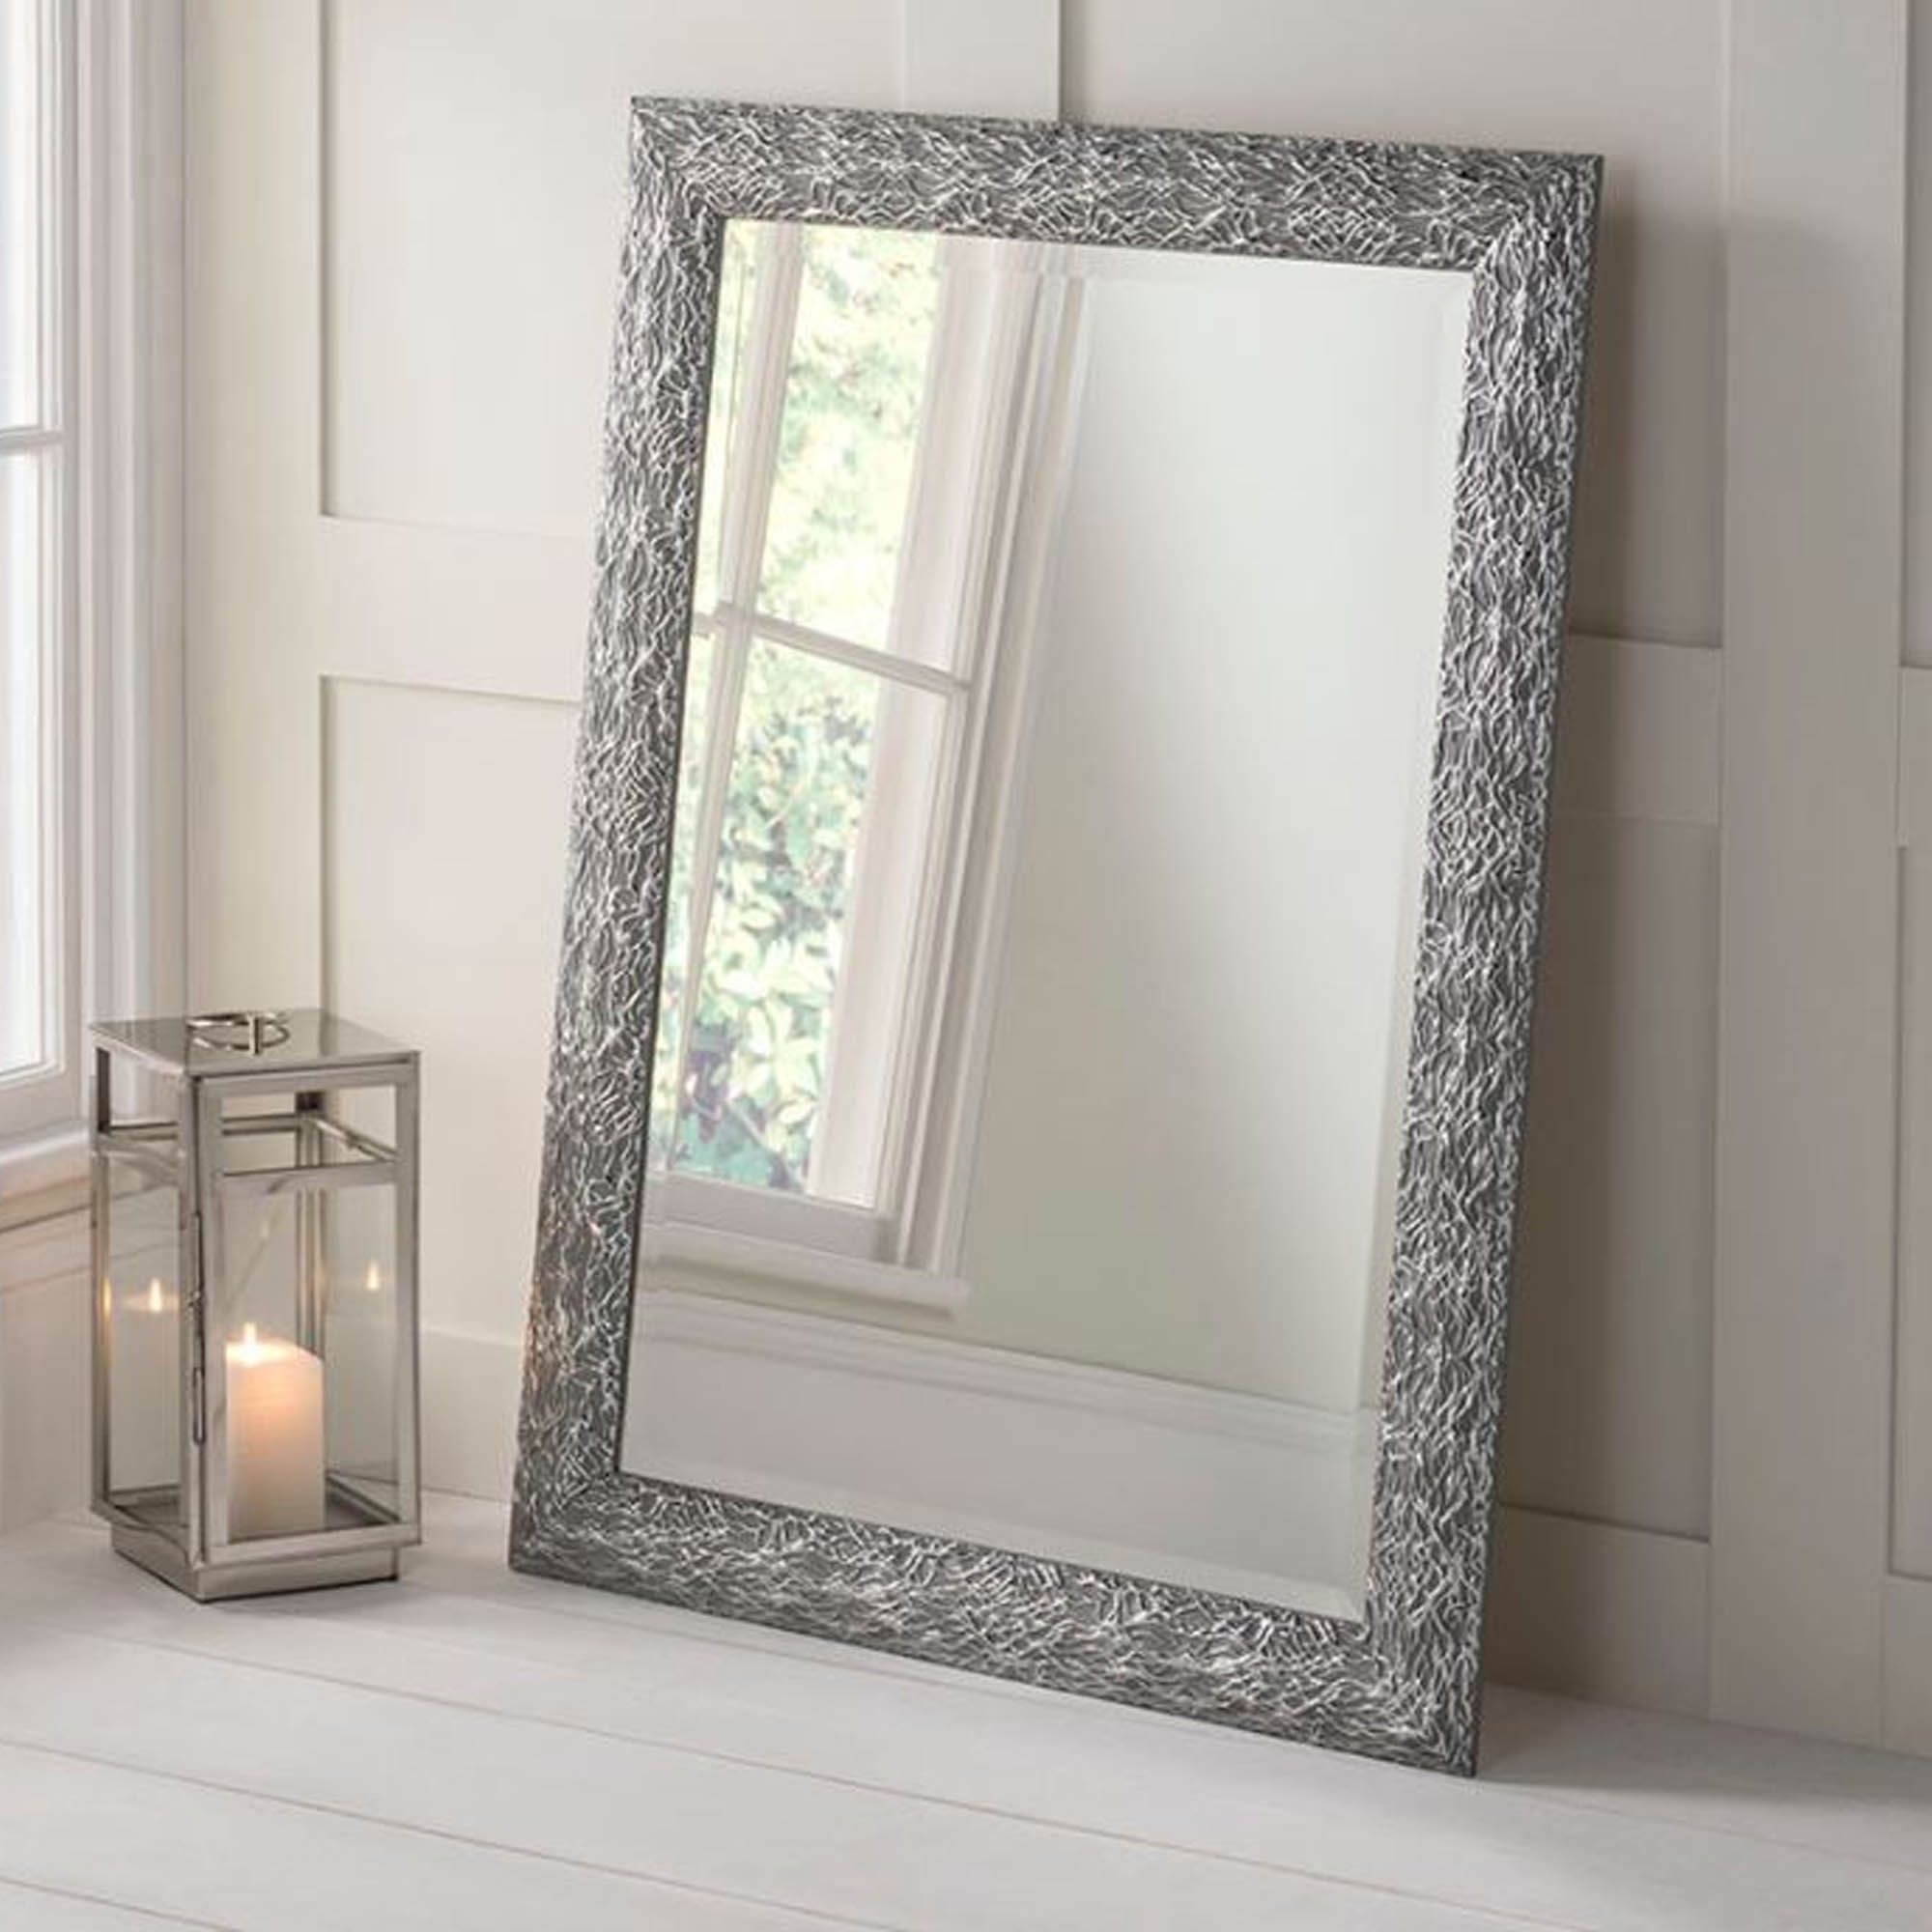 Detailed Rectangular Grey And Silver Wall Mirror | Hd365 With Silver Asymmetrical Wall Mirrors (View 5 of 15)